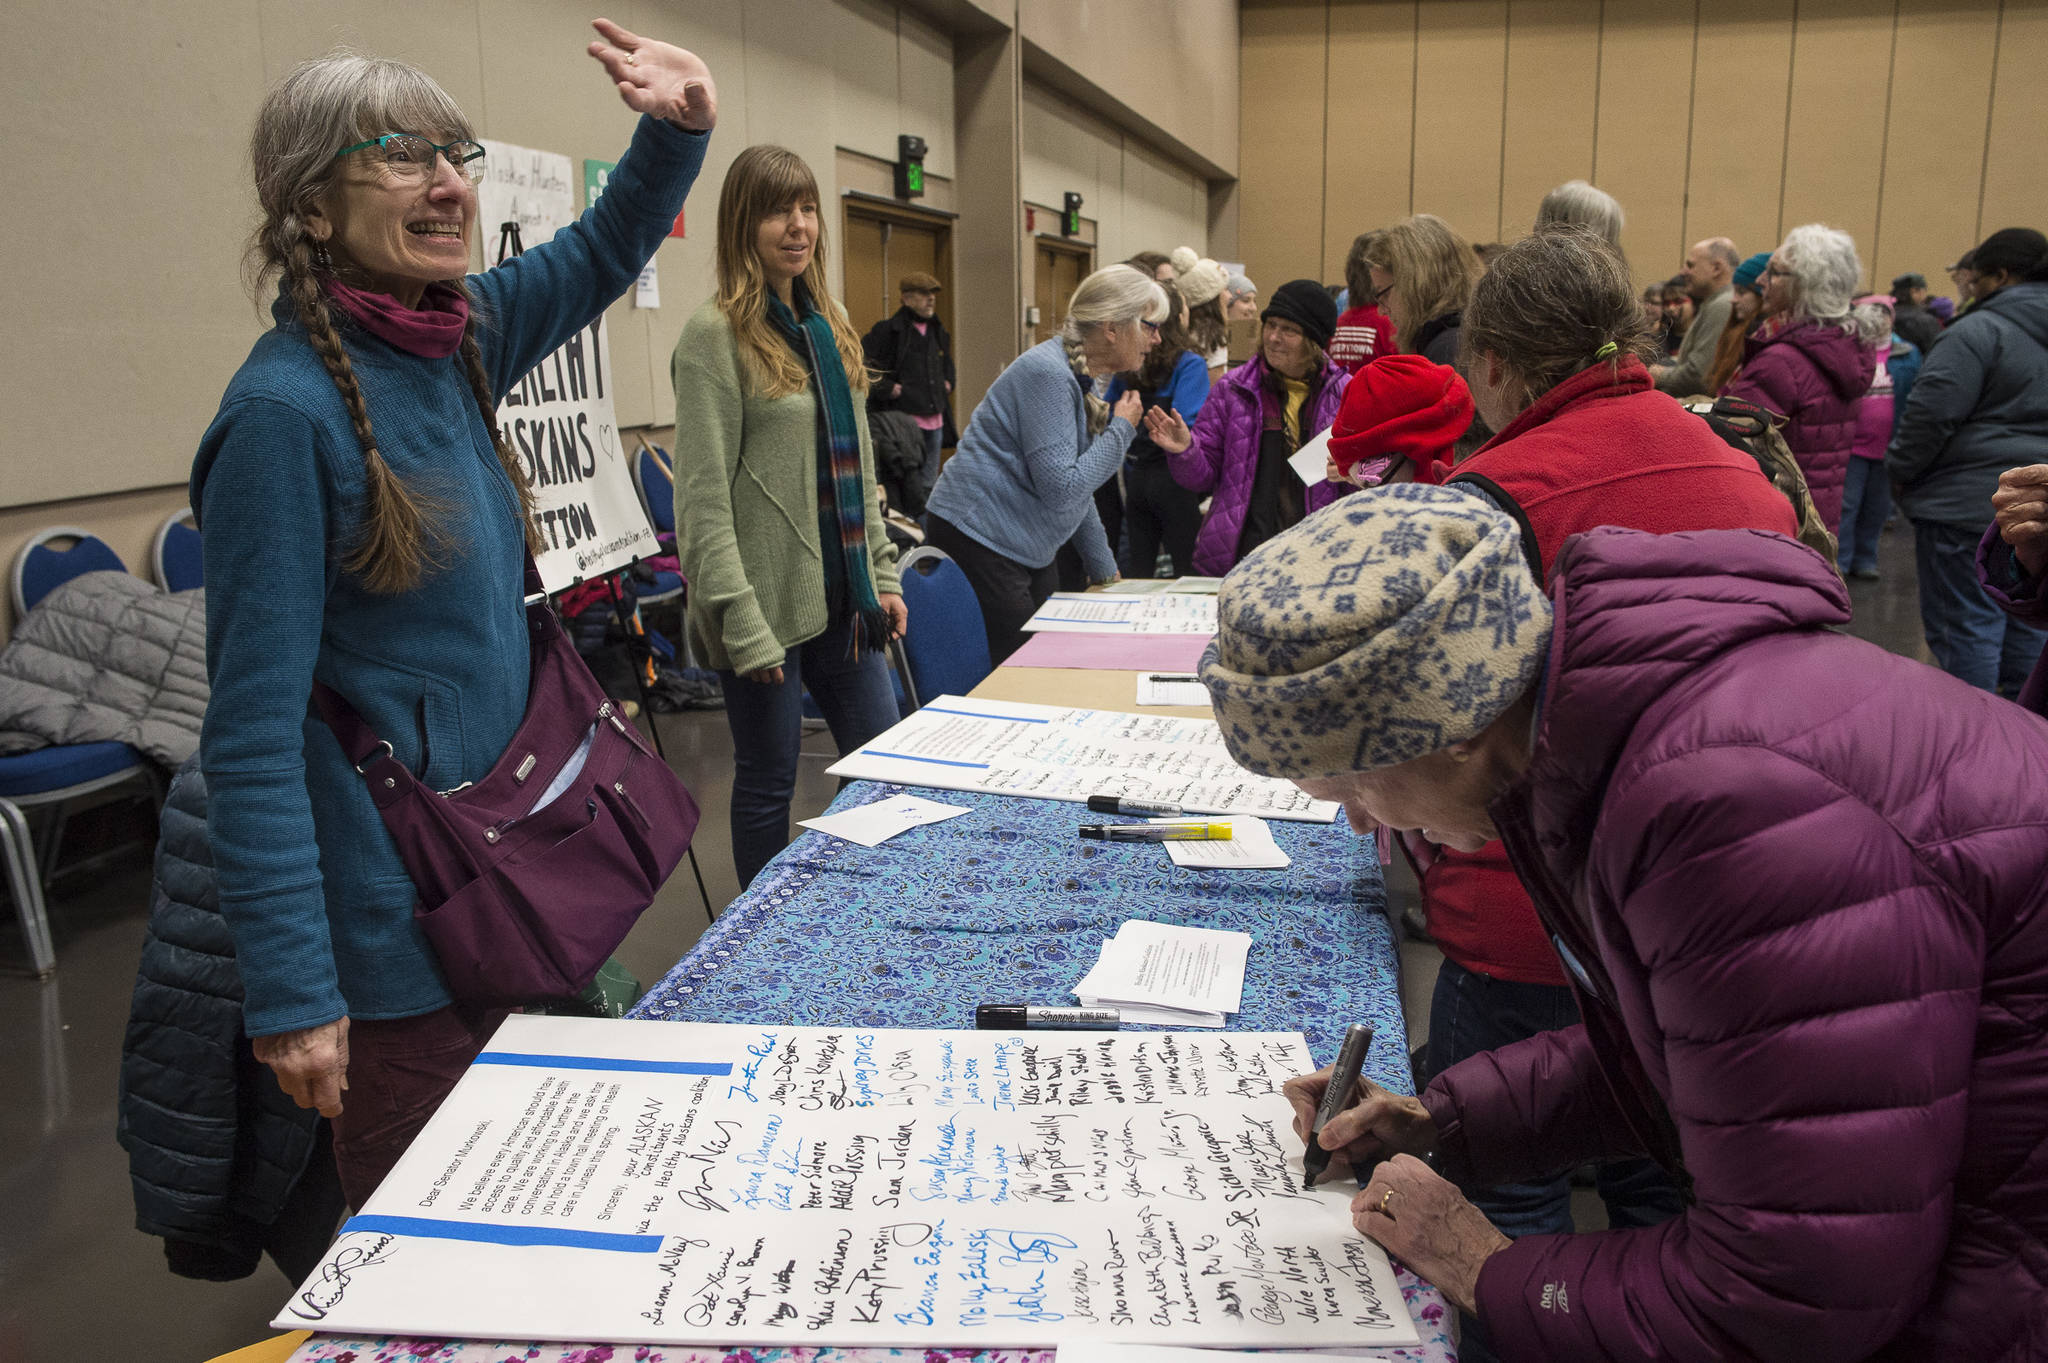 Luann McVey, left, and Julie Nielsen gather signatures for a universal health care letter to be sent to Sen. Lisa Murkowski after the Women’s March on Juneau at Centennial Hall on Saturday, Jan. 19, 2019. (Michael Penn | Juneau Empire)